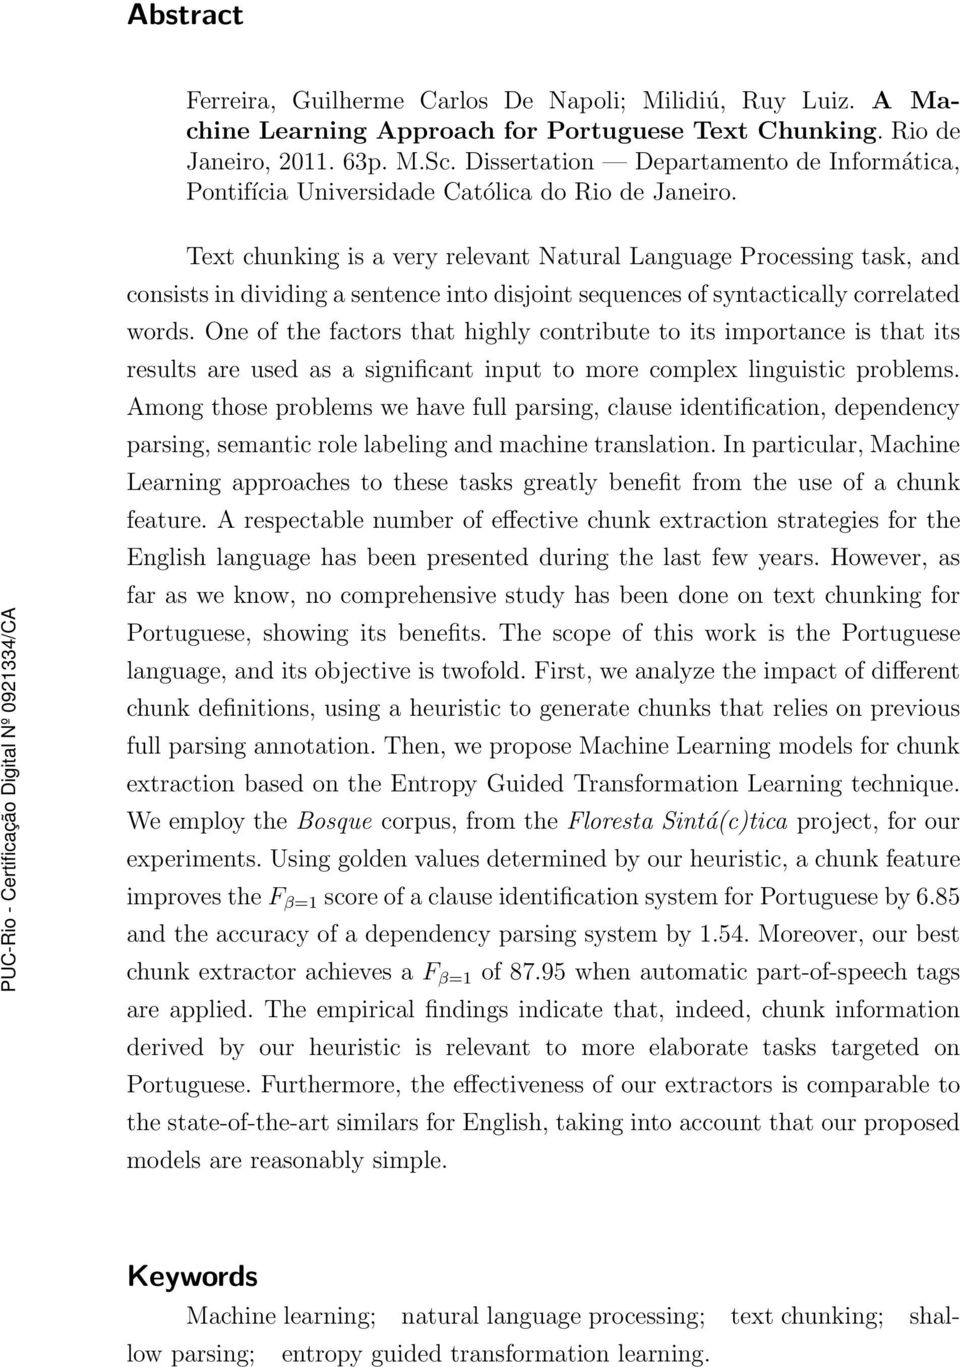 Text chunking is a very relevant Natural Language Processing task, and consists in dividing a sentence into disjoint sequences of syntactically correlated words.